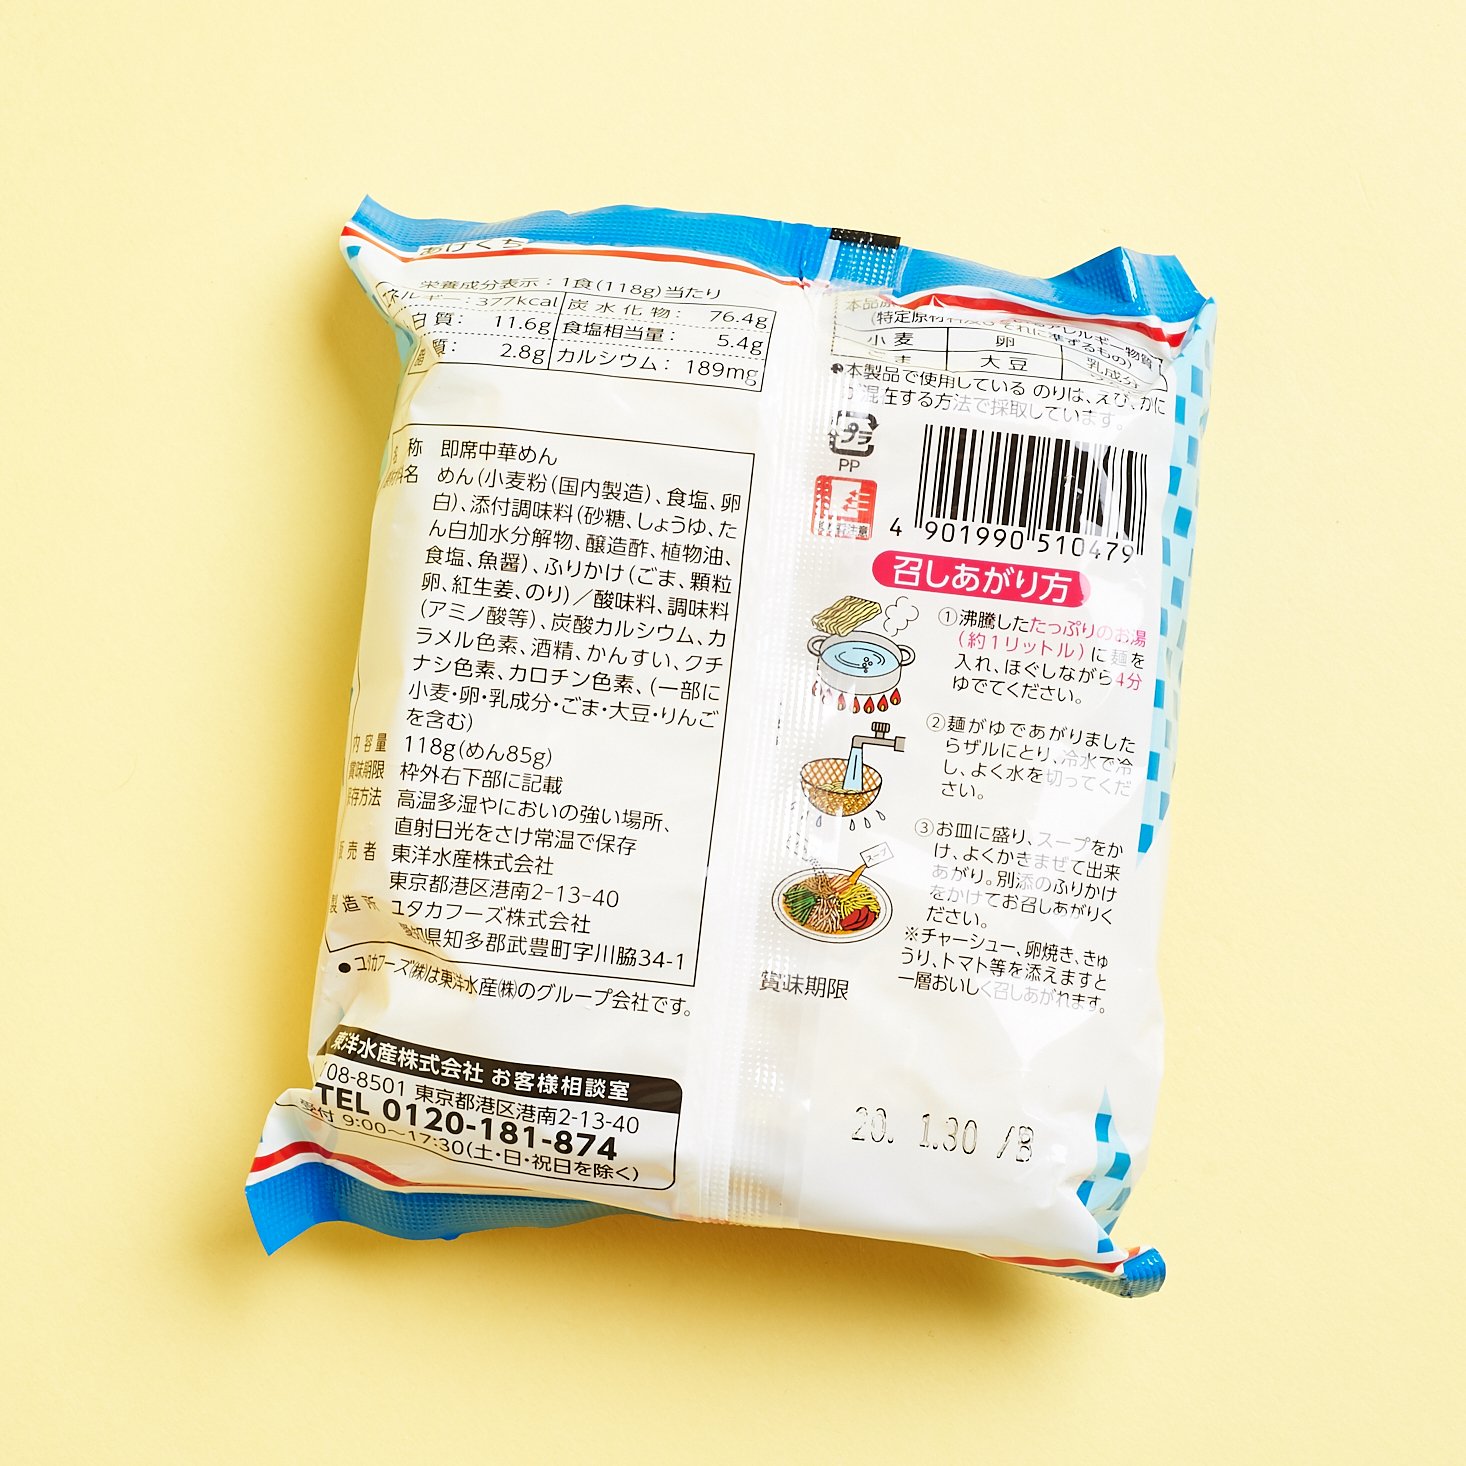 backside of the cold ramen packaging with illustrated instructions